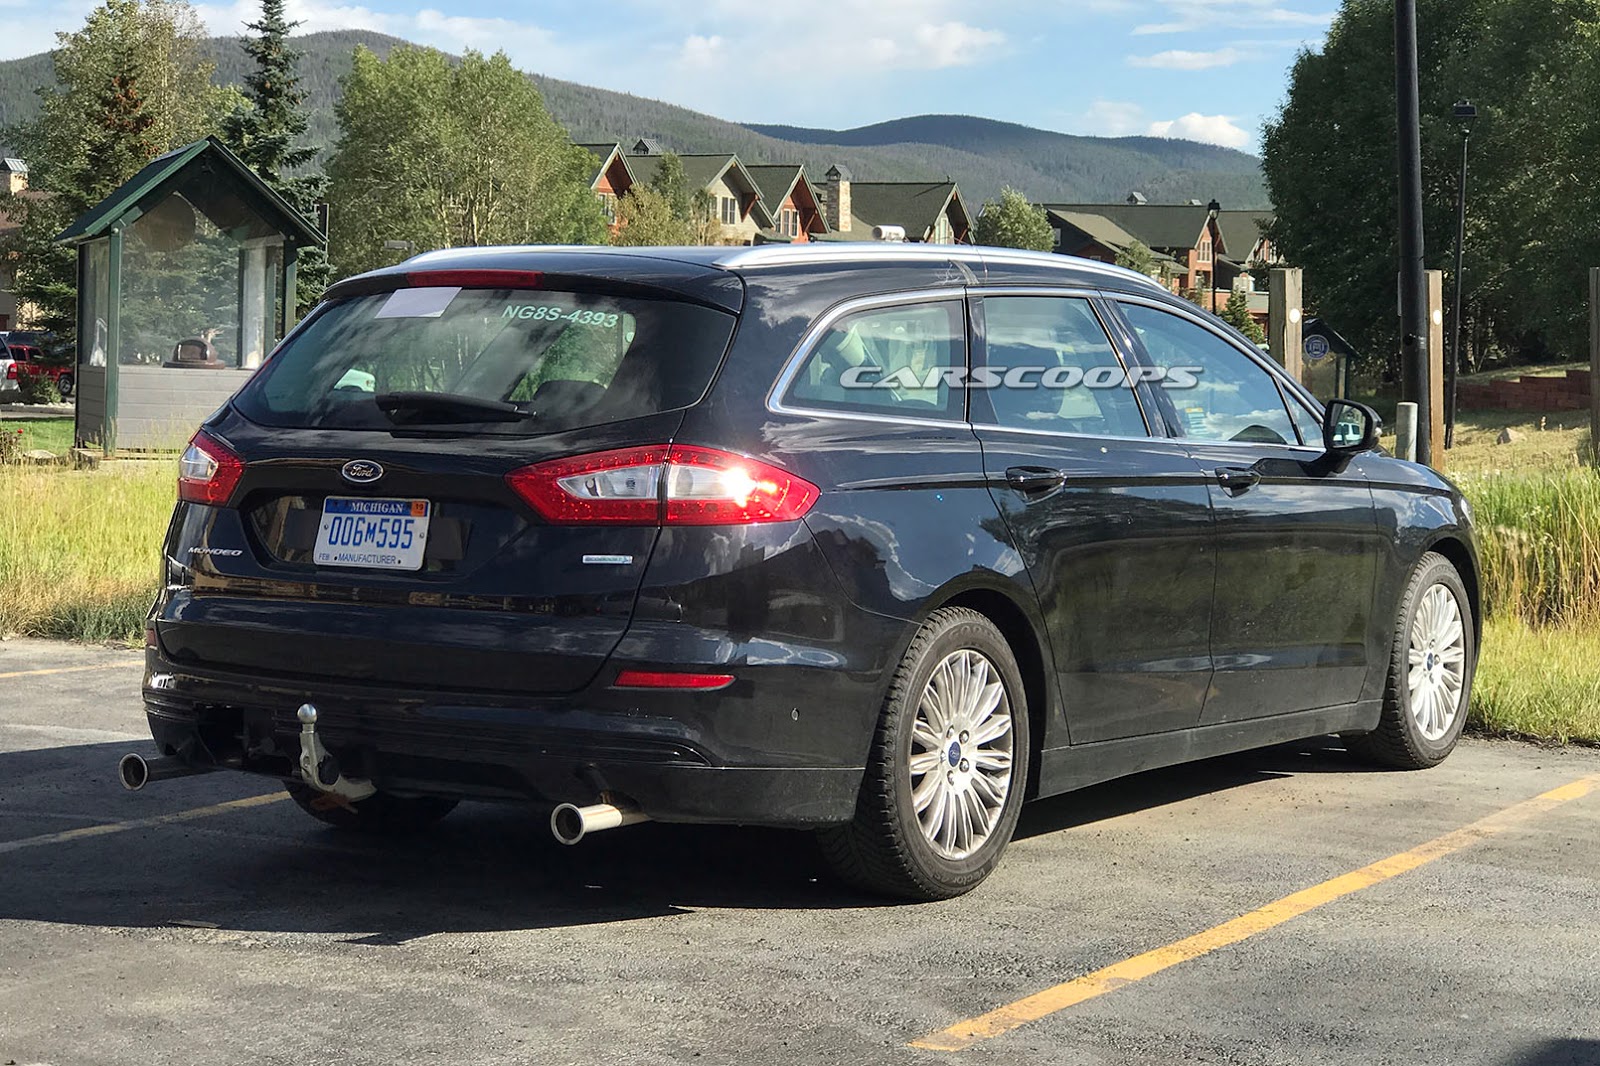 What's Doing Testing A (Mondeo) Station Wagon On Soil? | Carscoops